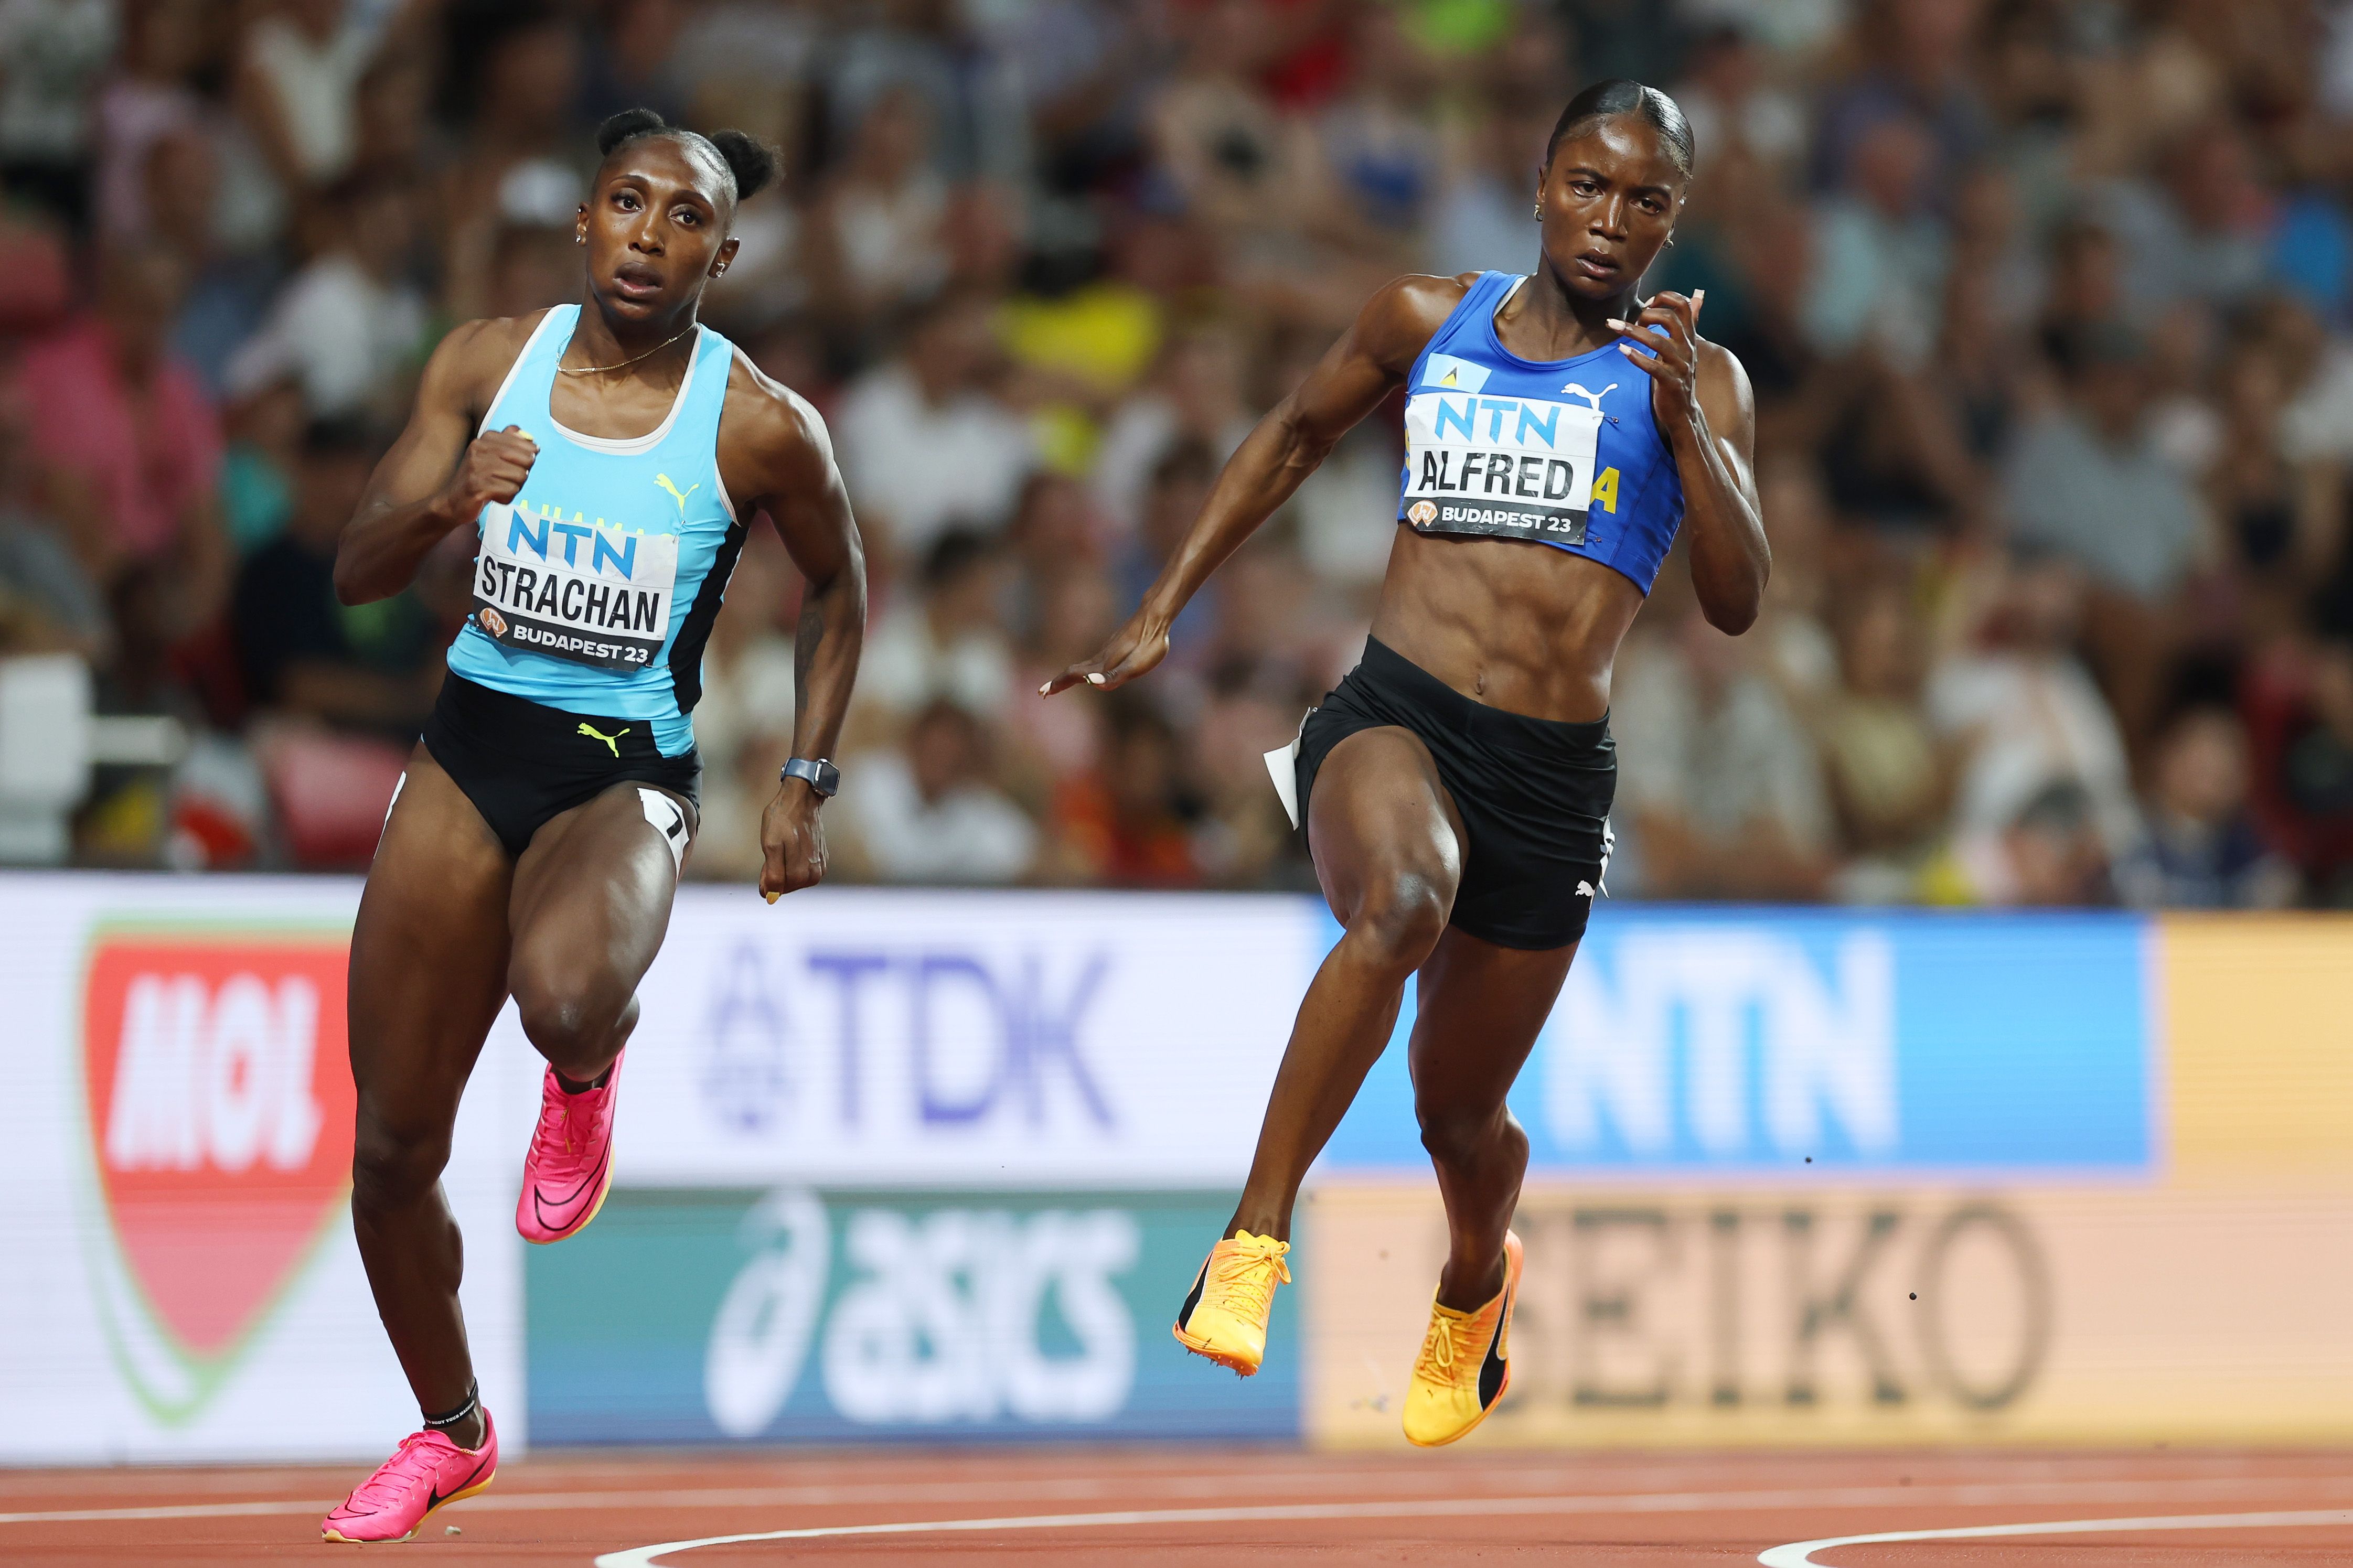 Julien Alfred in action in the 200m at the World Championships in Budapest